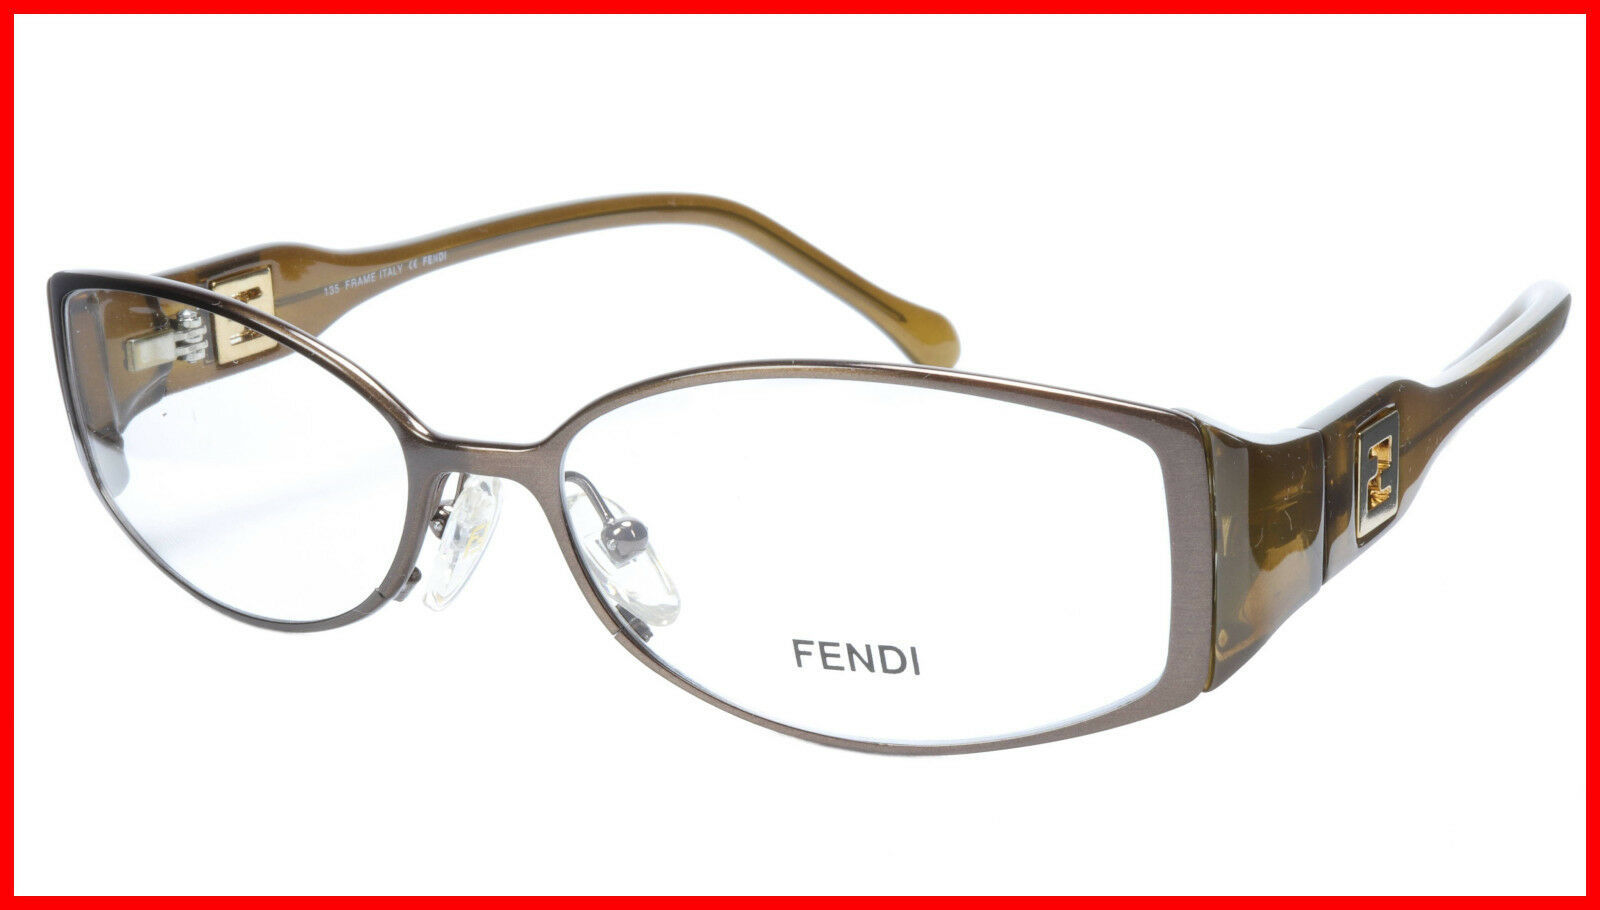 Primary image for FENDI Eyeglasses Frame F707 (205) Metal Acetate Brown Italy Made 54-15-135, 31